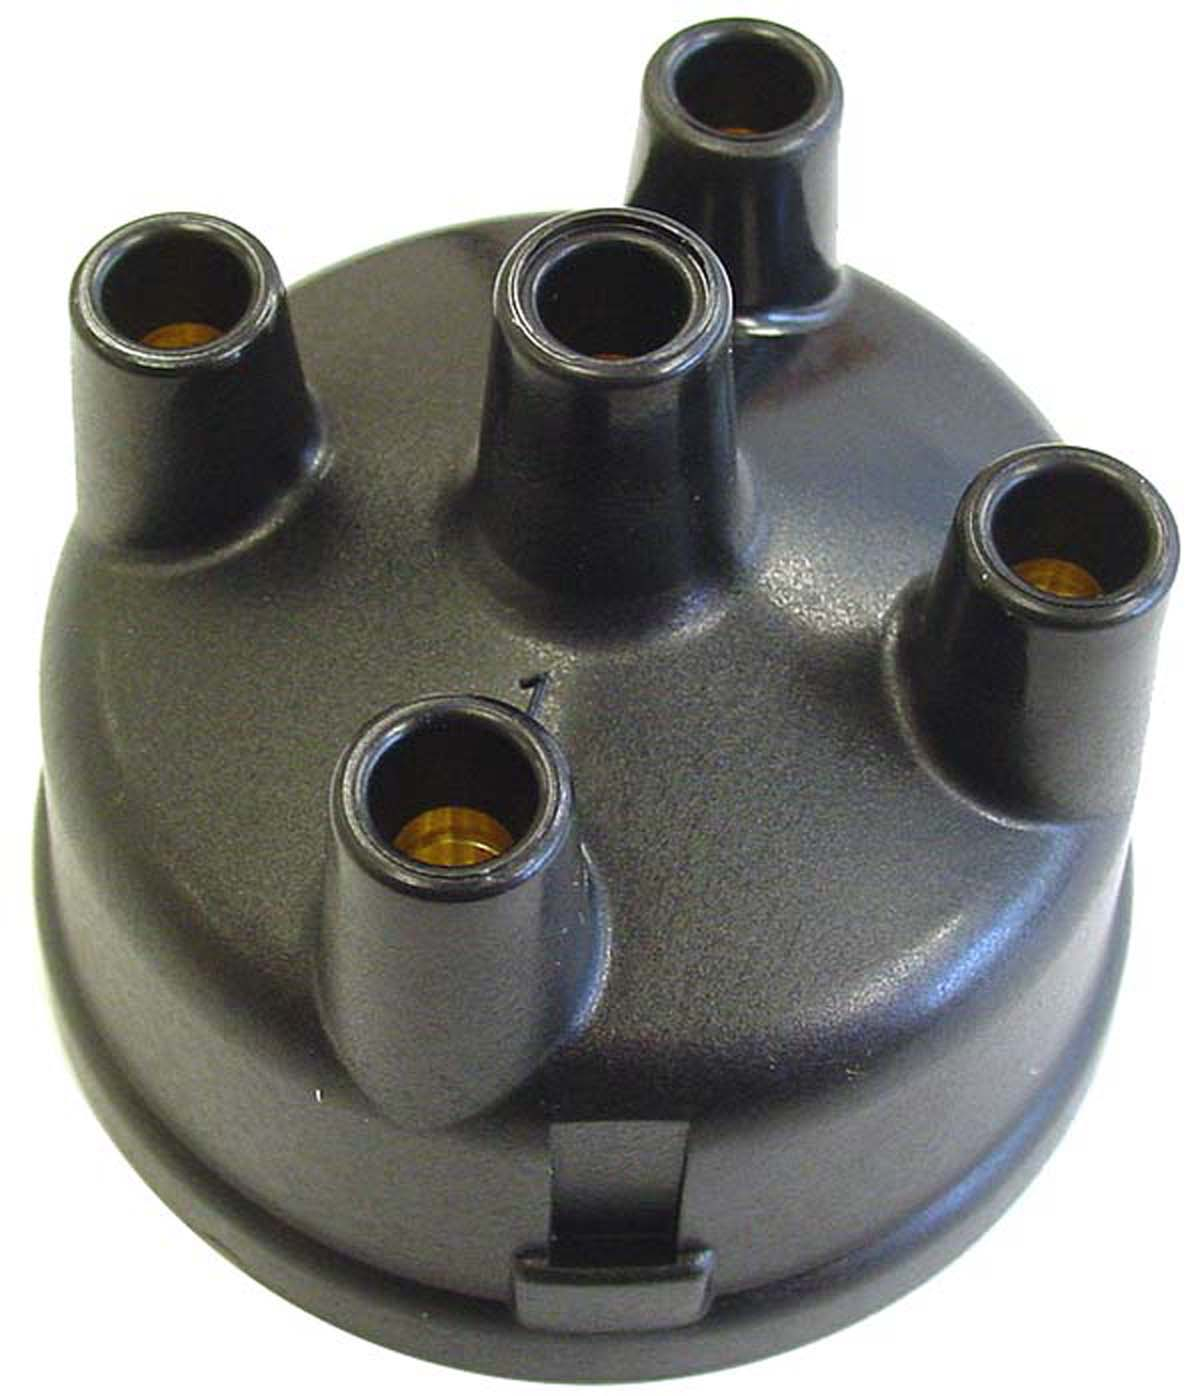 ABC063 - DISTRIBUTOR CAP - Ford N Tractor Parts - Parts for Ford N ...